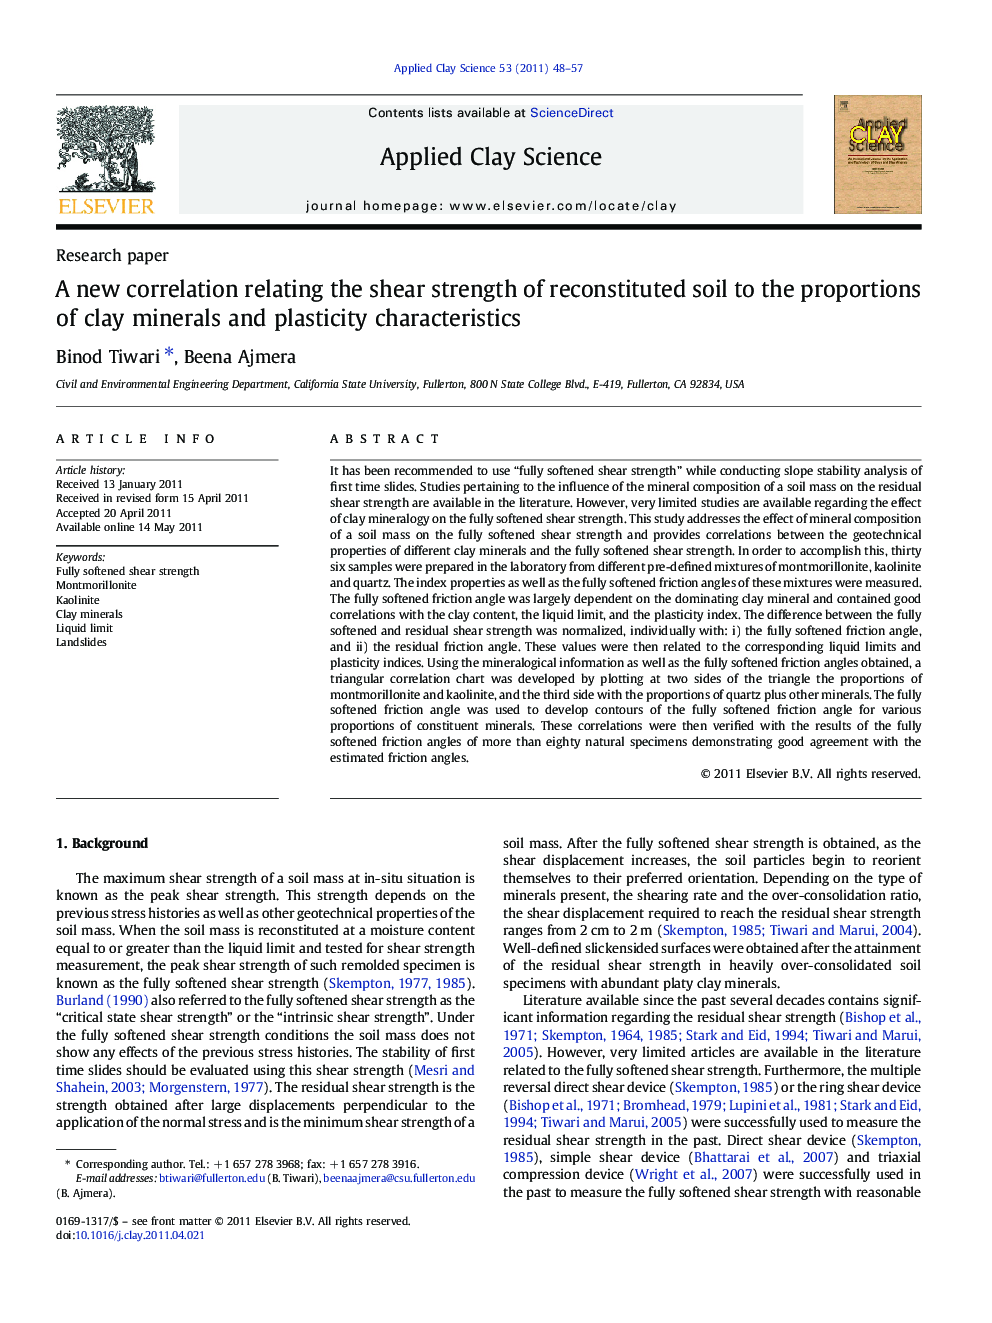 A new correlation relating the shear strength of reconstituted soil to the proportions of clay minerals and plasticity characteristics